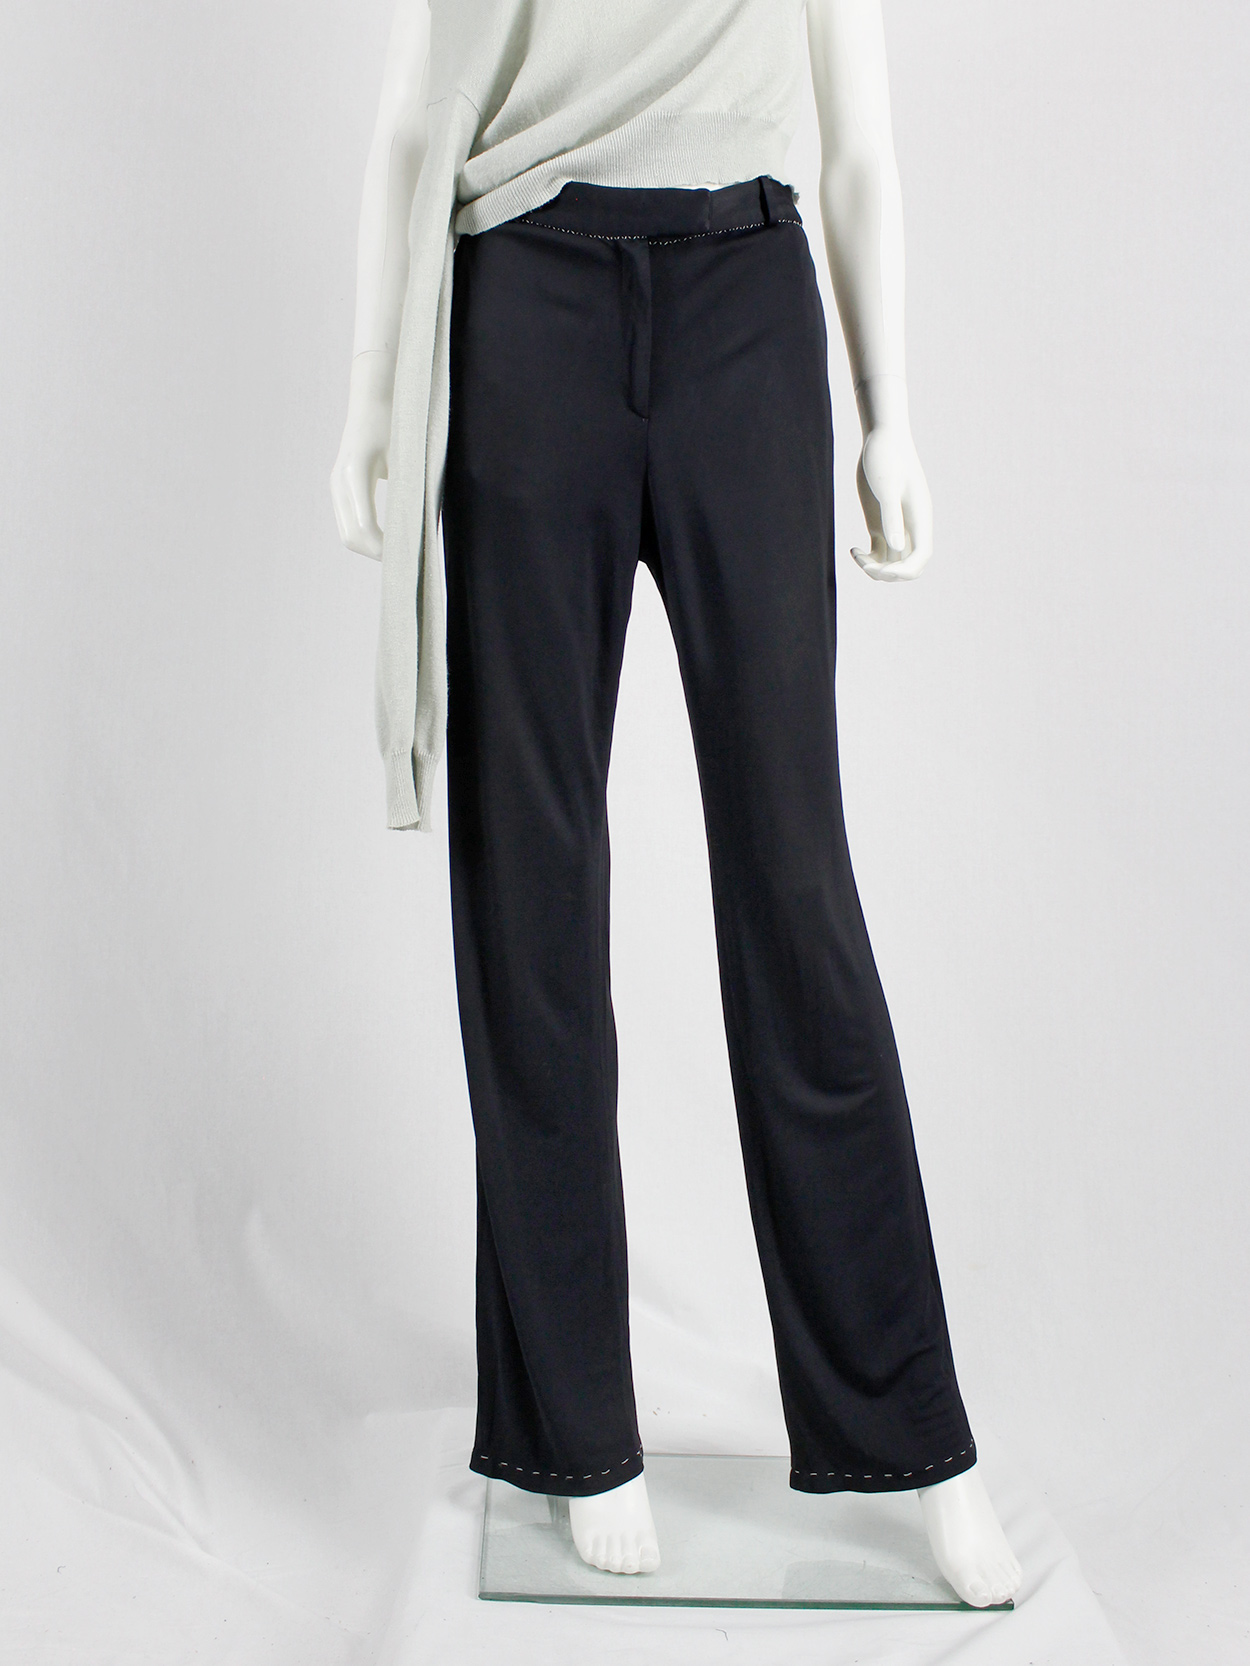 Maison Martin Margiela dark blue trousers with white exposed stitches spring 2002 (2)